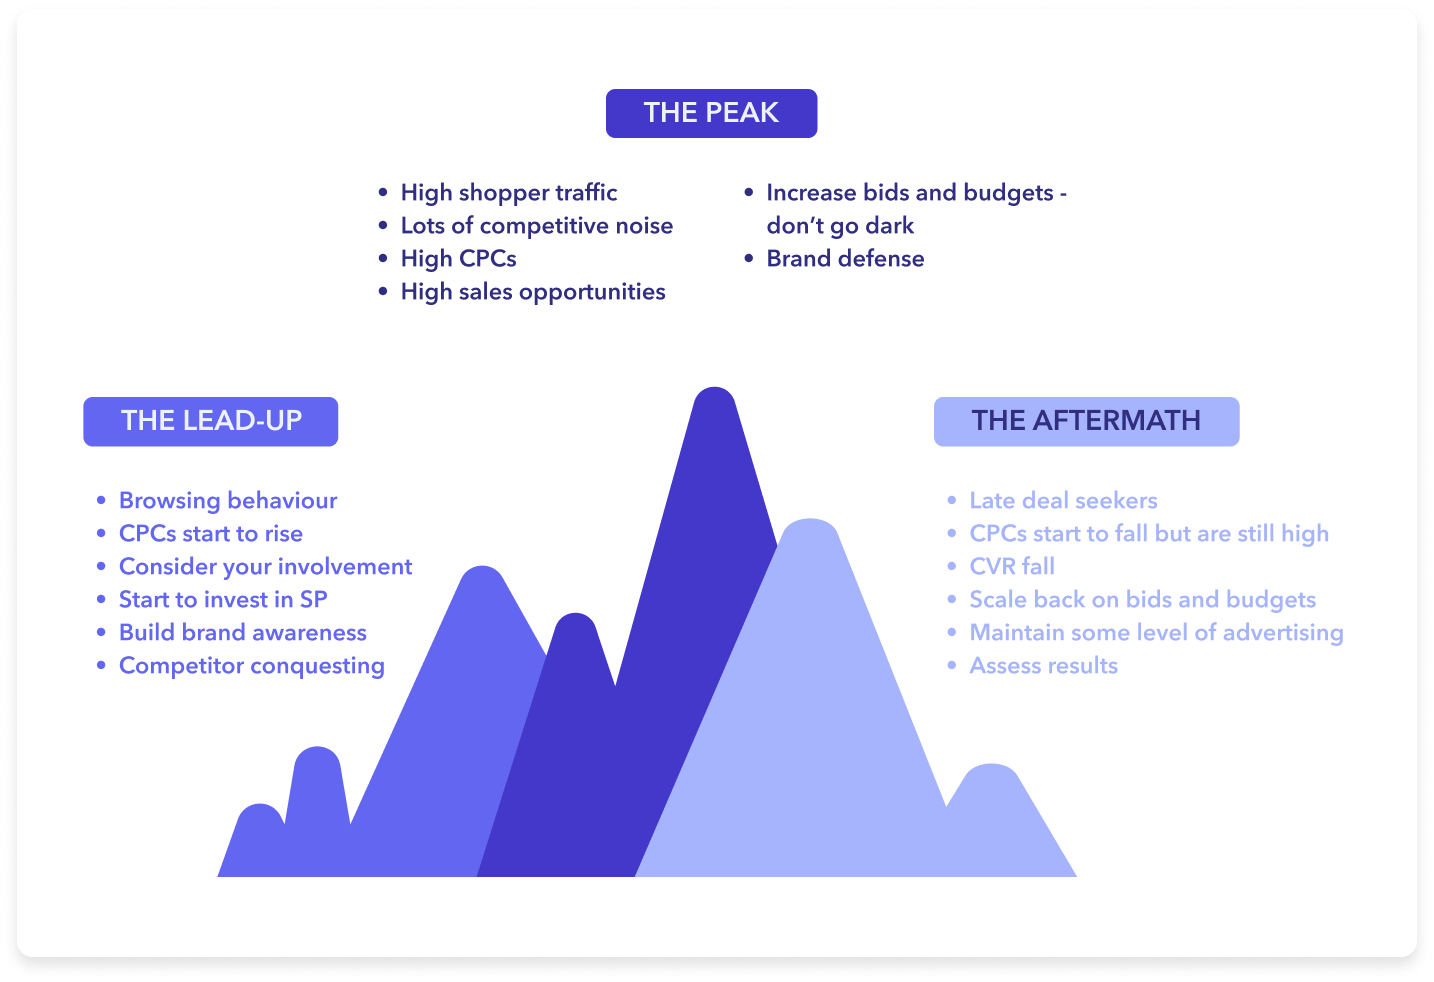 The three stages of peak event advertising